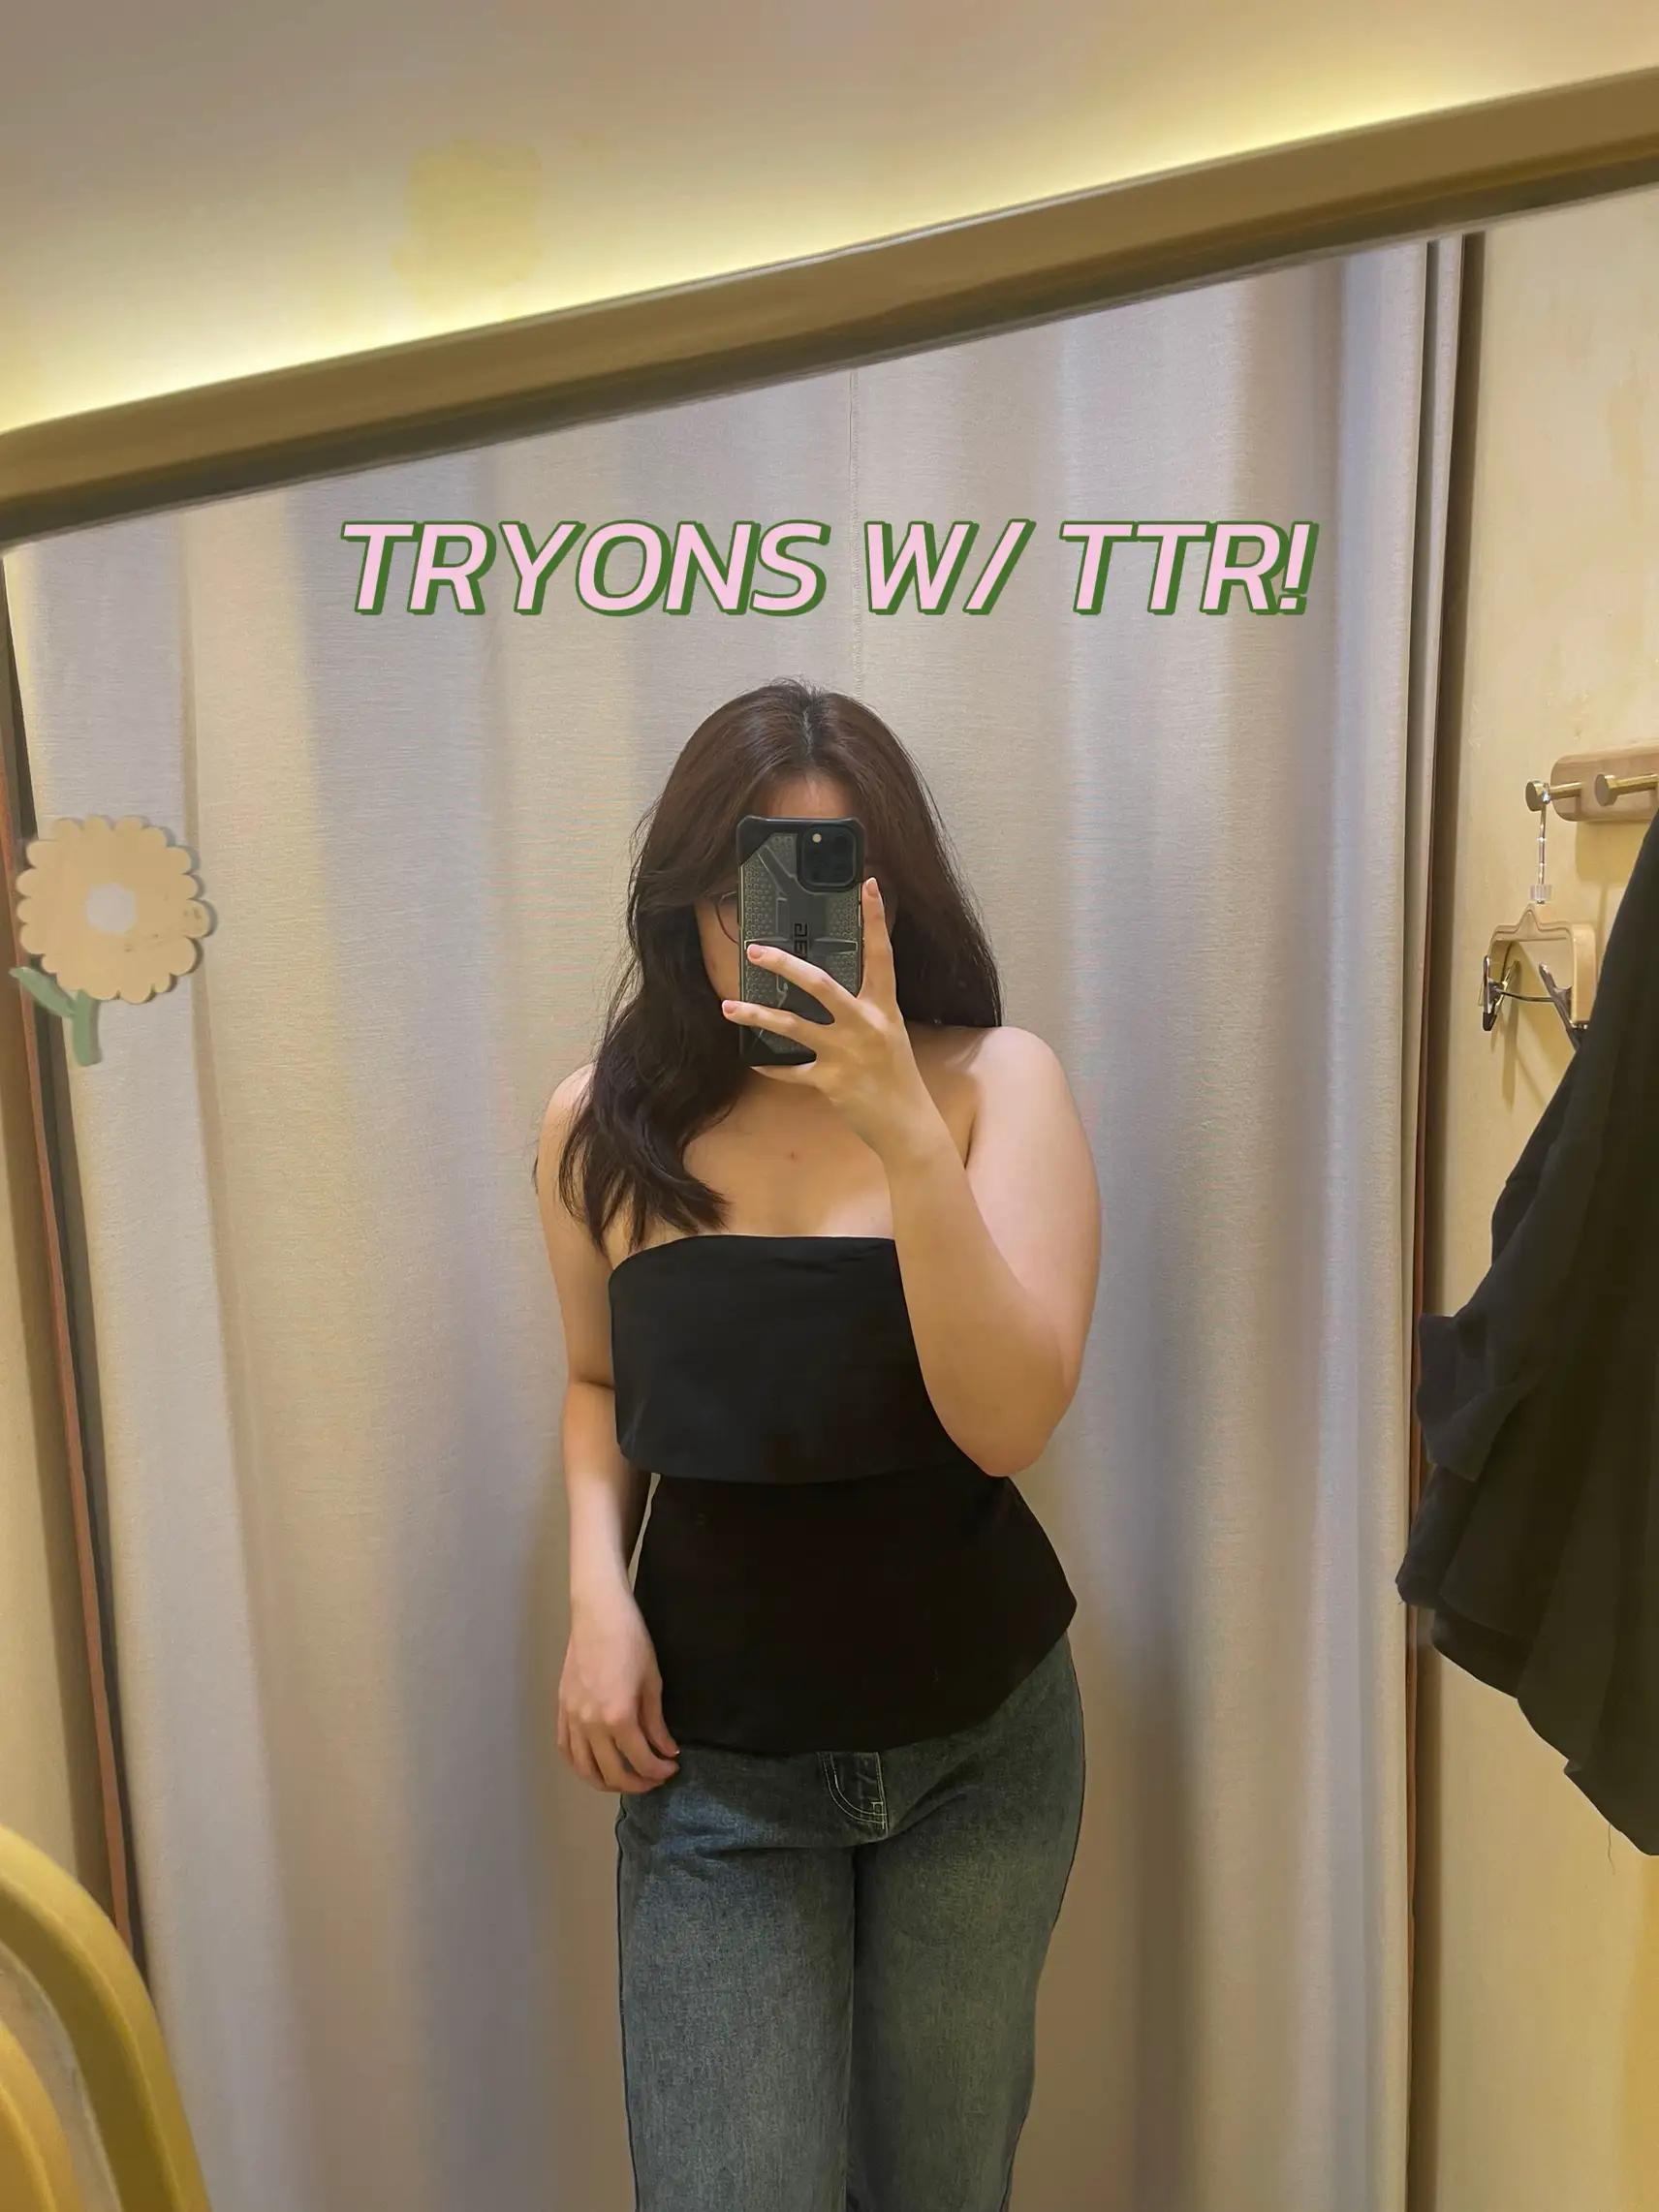 TRYONS W/ TTR! 's images